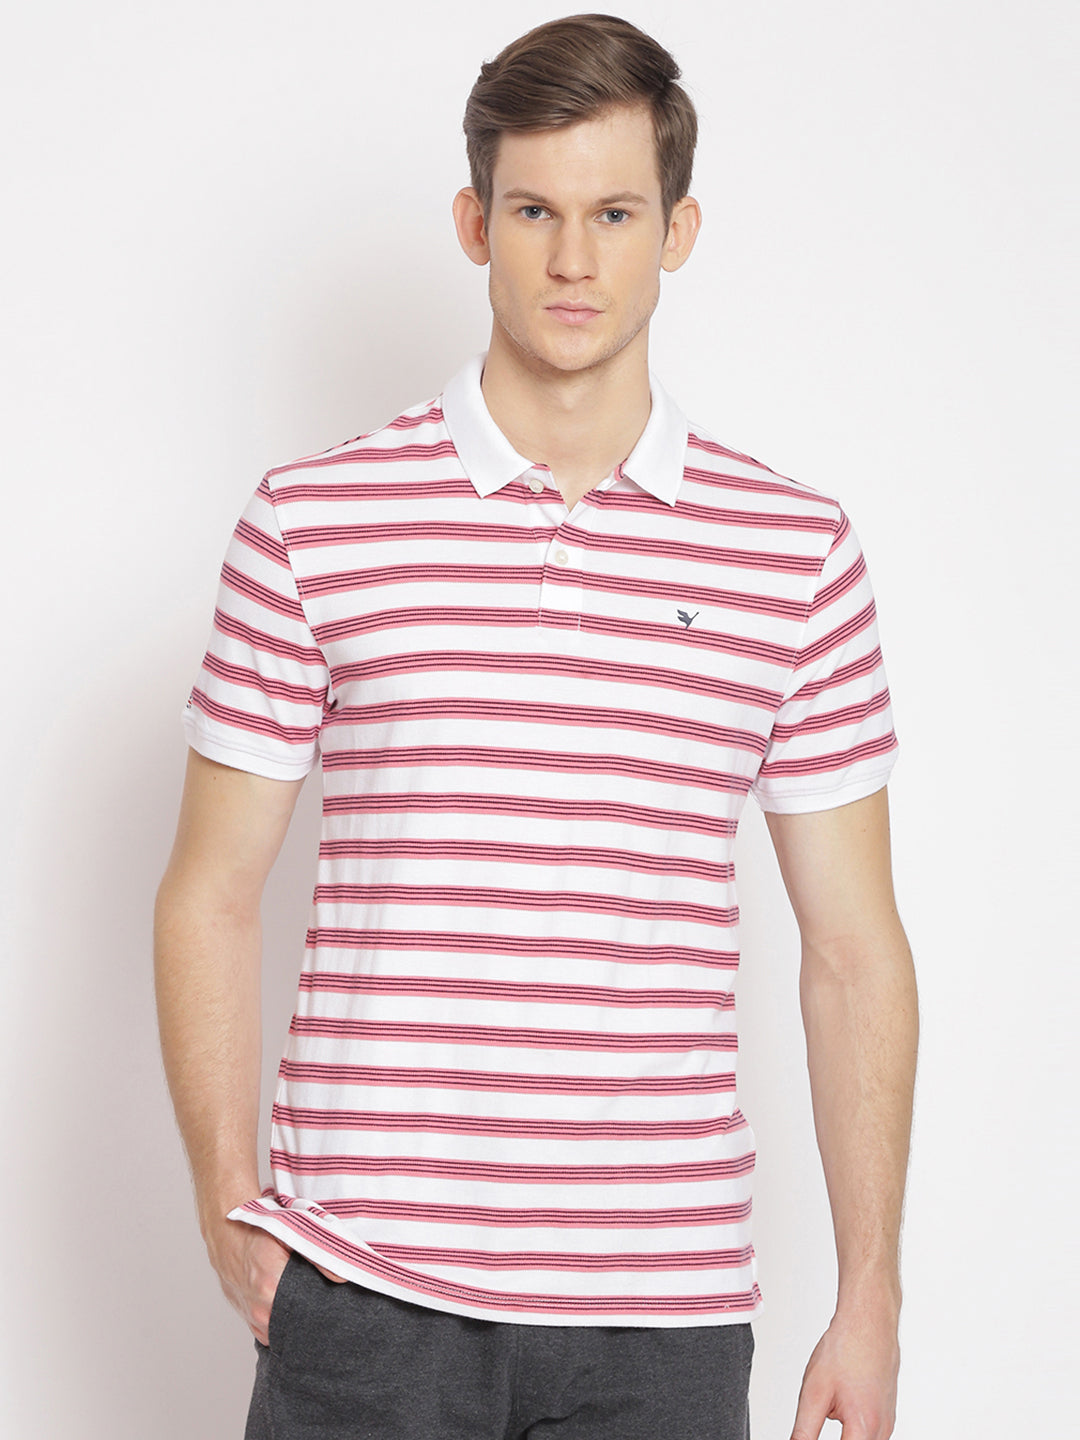 Men's Pink Striped Half Sleeve Polo